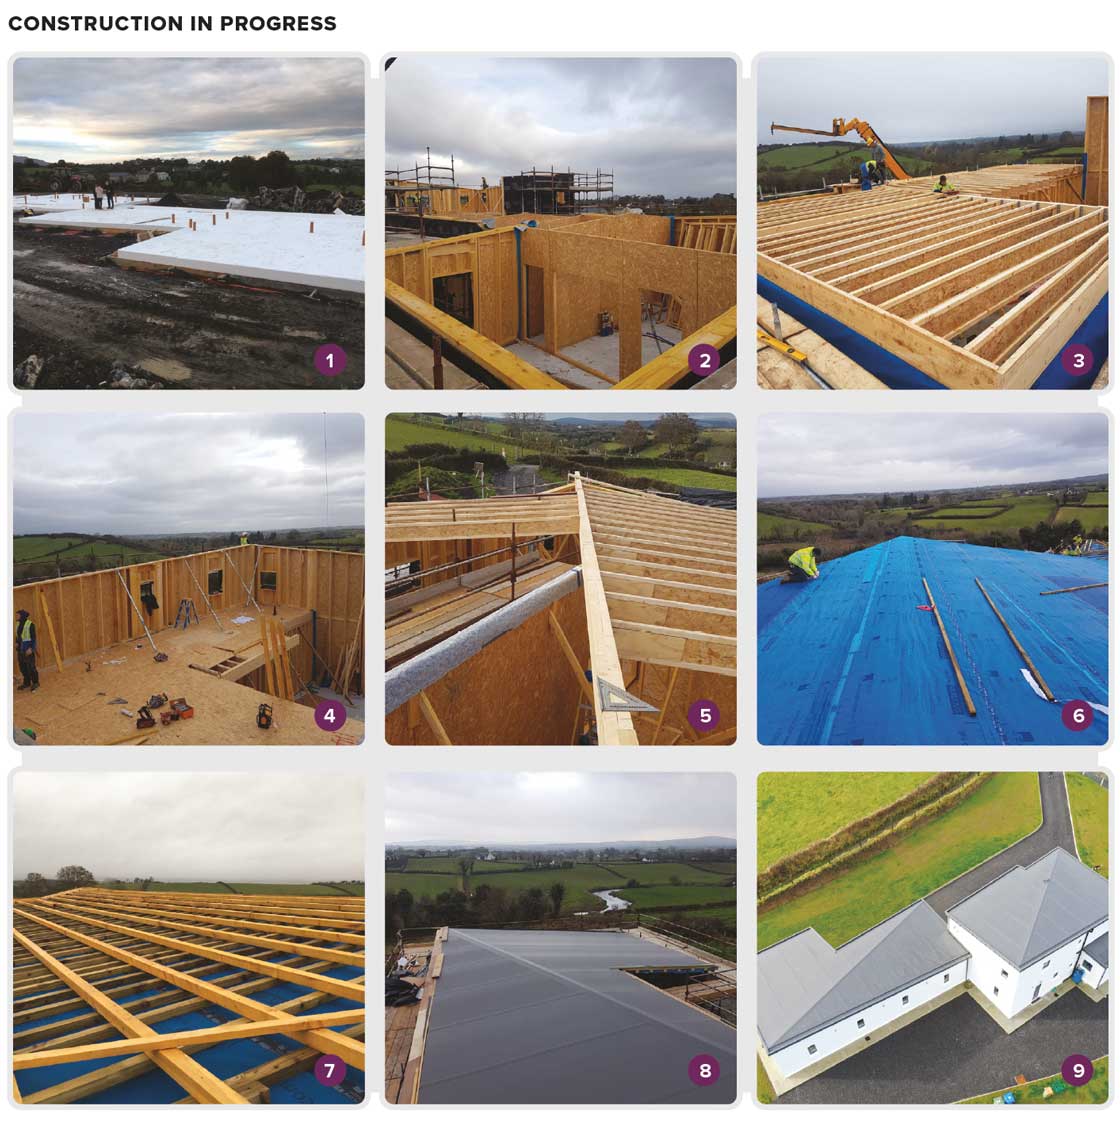 The construction of the house in sequence including; 1 insulated raft foundation with 200 mm EPS insulation; 2 the fi rst storey of the timber frame system; 3 erection of I-beams for the intermediate fl oor; 4 the second storey walls, which would later be fi lled with cellulose insulation; 5 timber structure of the sculpted, origami-inspired roof; 6 pro clima Solitex Plus breather membrane being installed on the roof; 7 battening over the membrane to form a ventilated cavity; 8 installation of the Alkor PVC roof; 9 drone shot of the the fi nished roof.